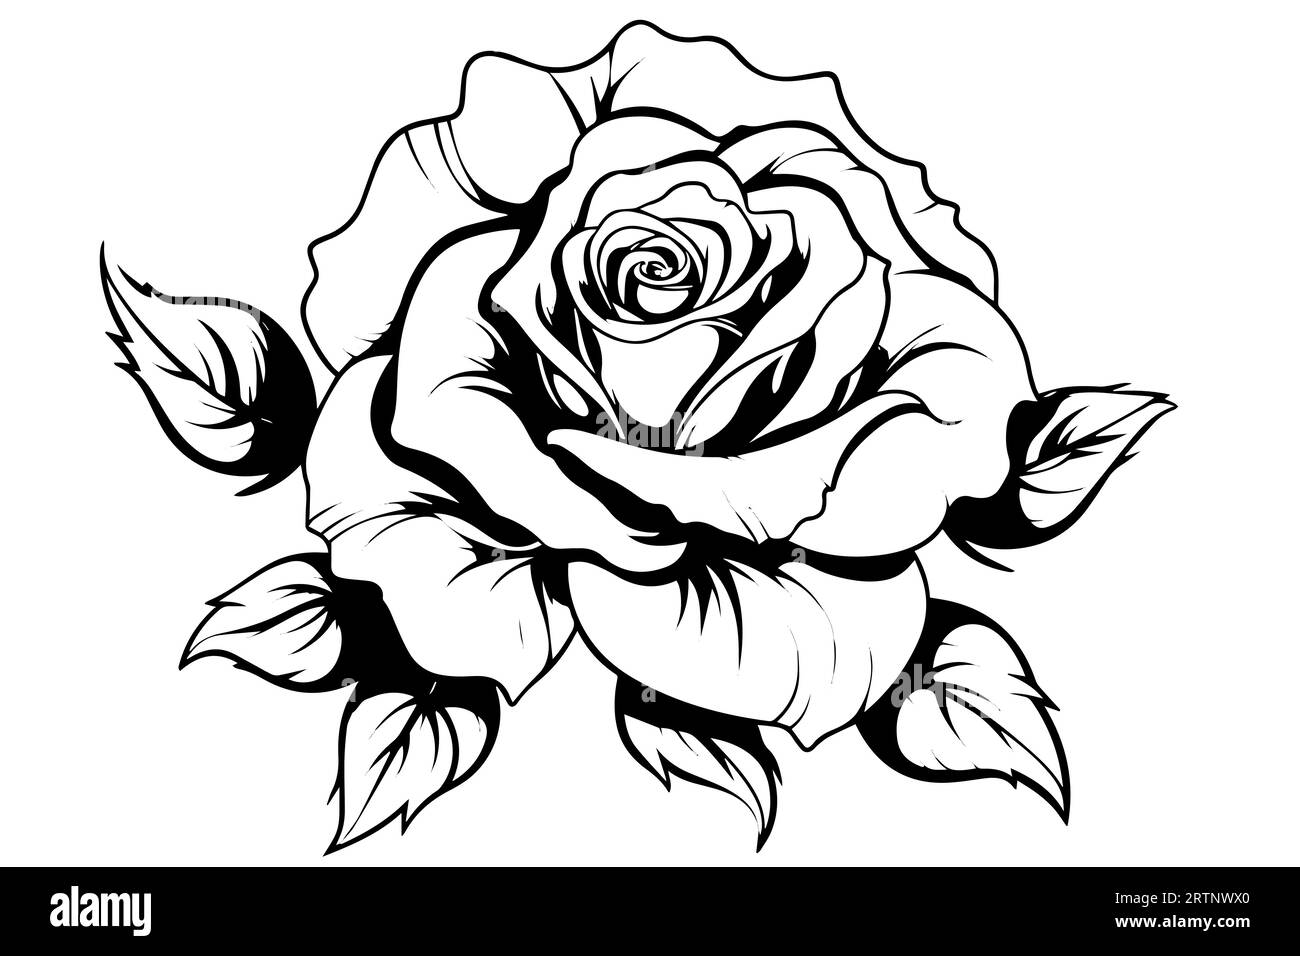 50,994 Antique Floral Tattoo Images, Stock Photos, 3D objects, & Vectors |  Shutterstock